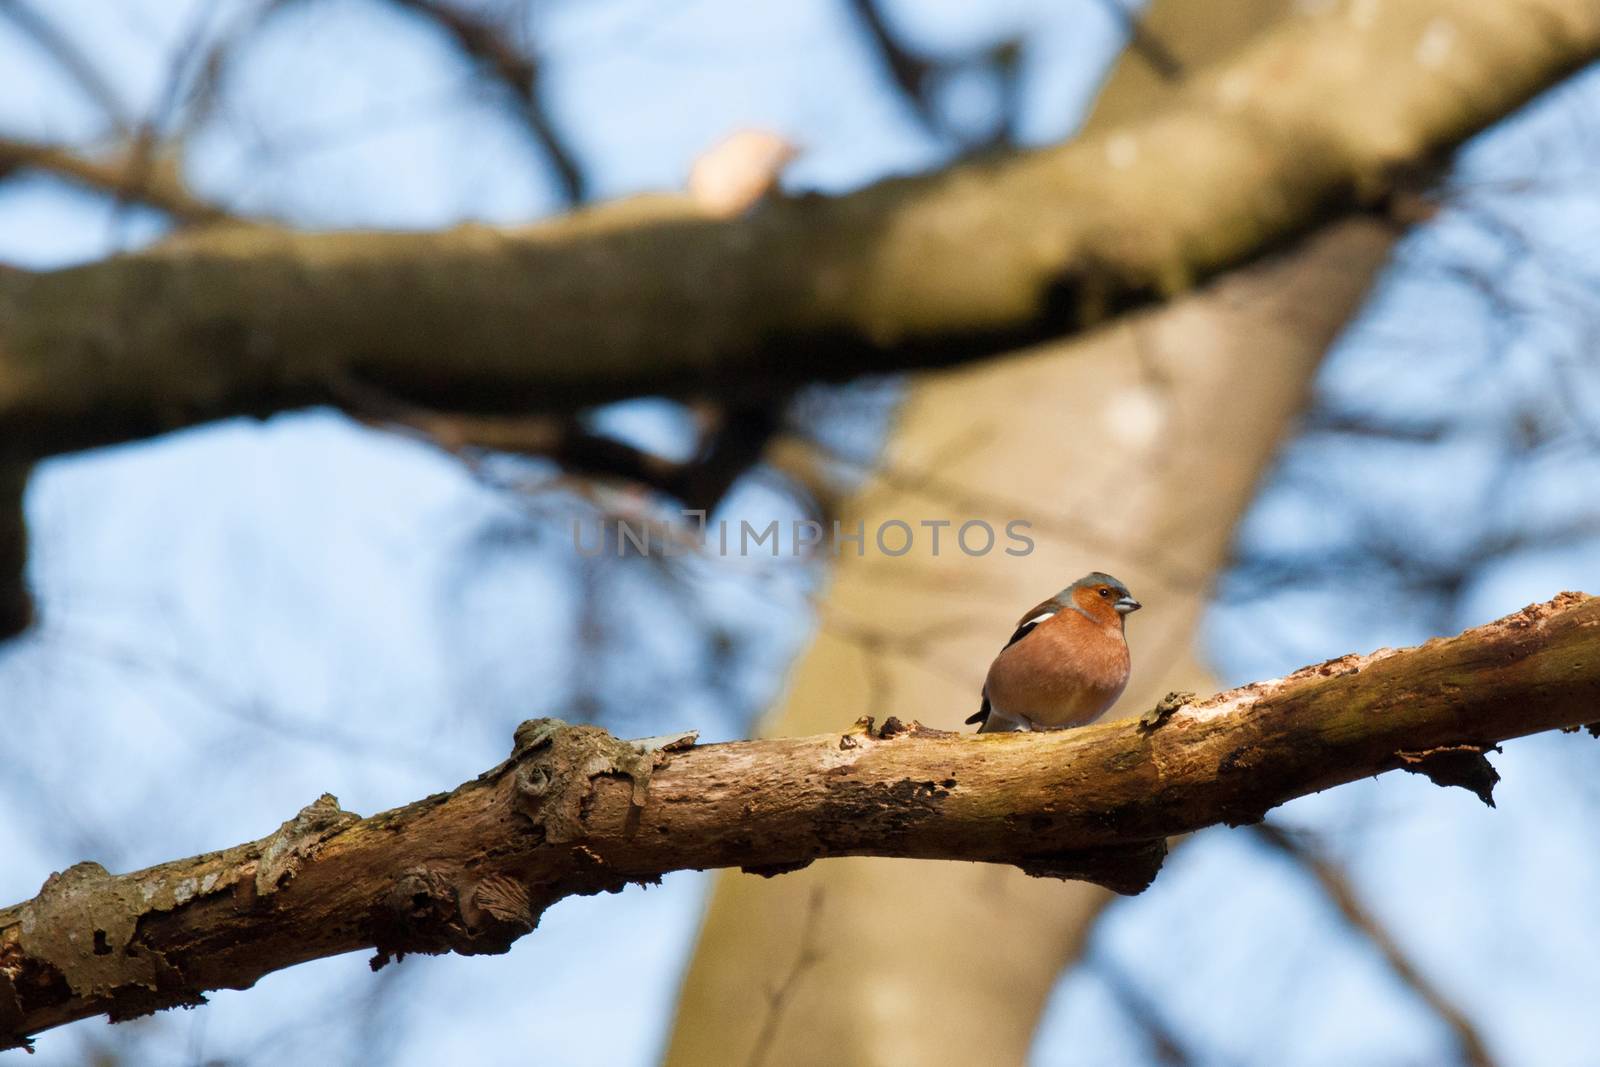 Chaffinch in the forest at wintertime by Sportactive